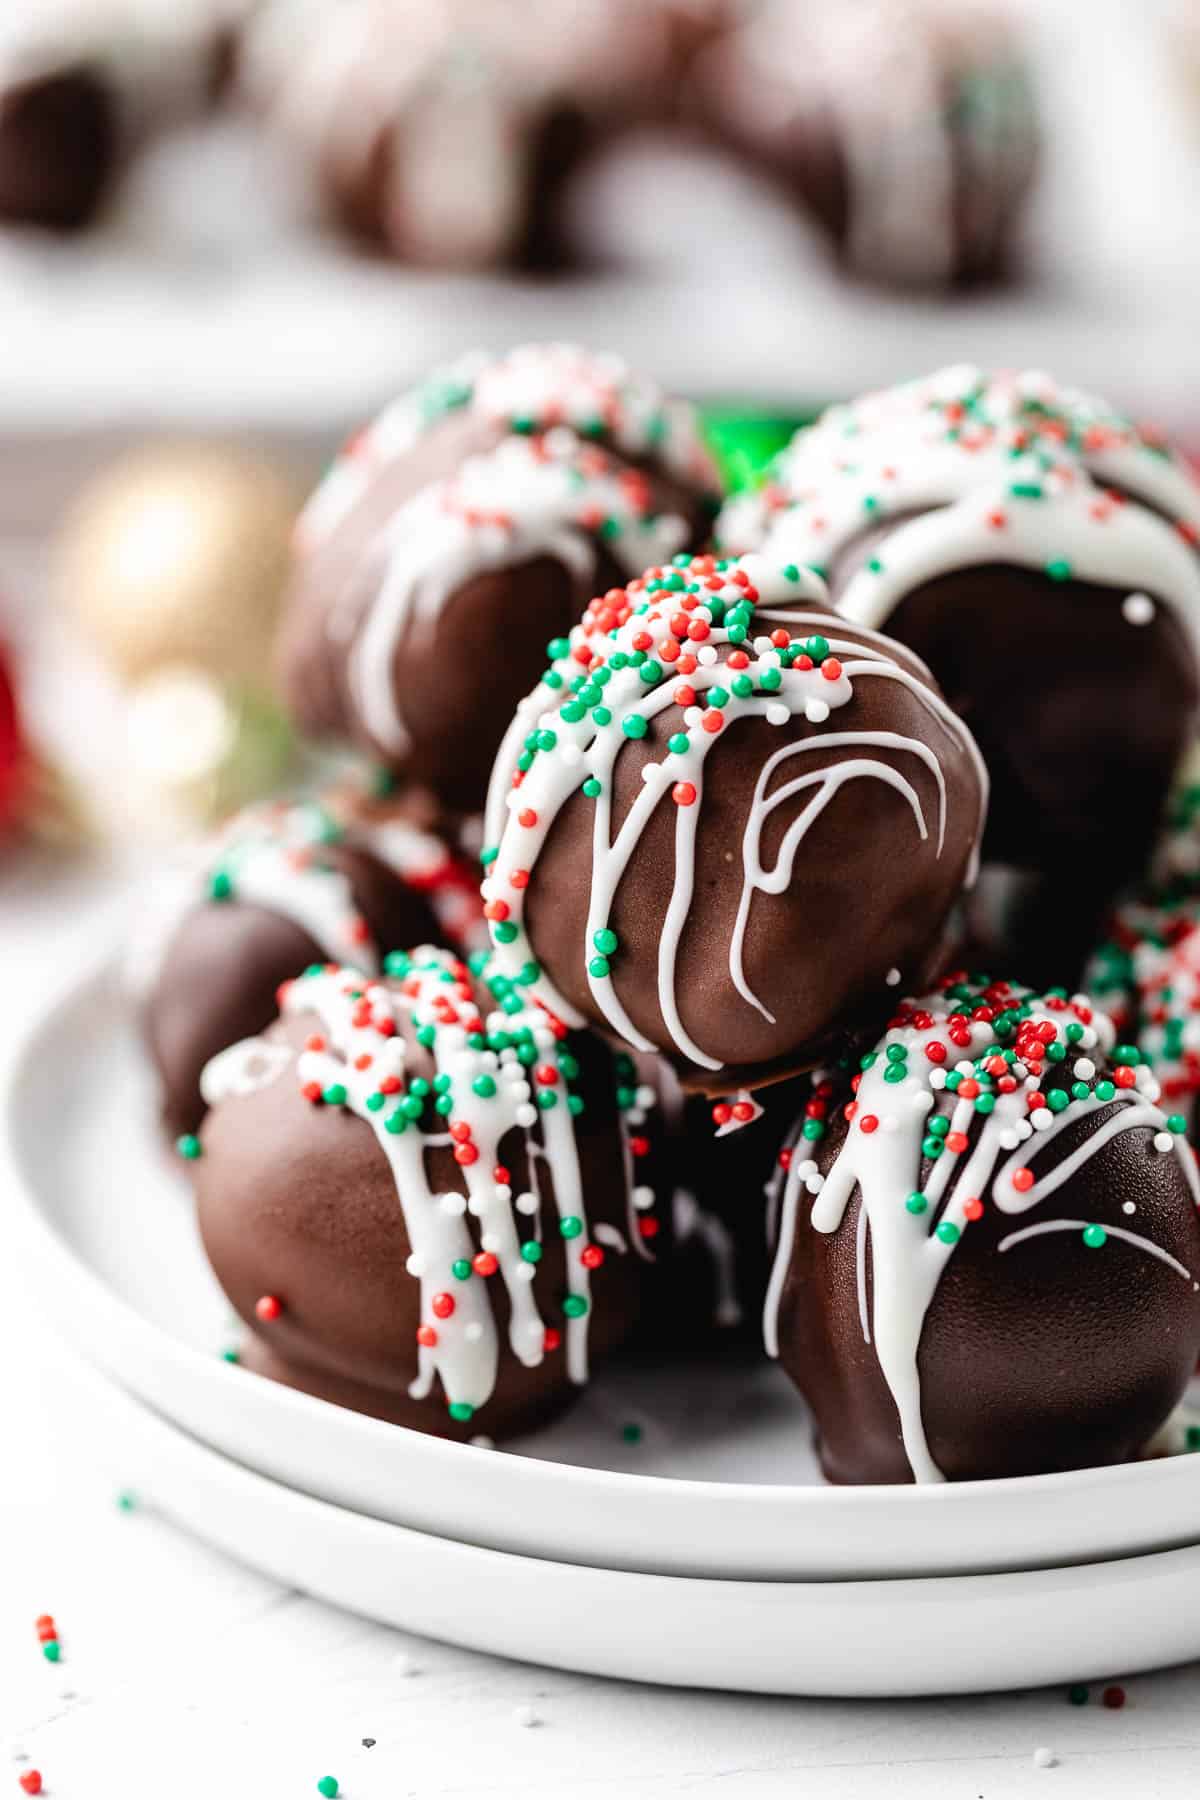 Red, green, and white sprinkles over brownie candies.